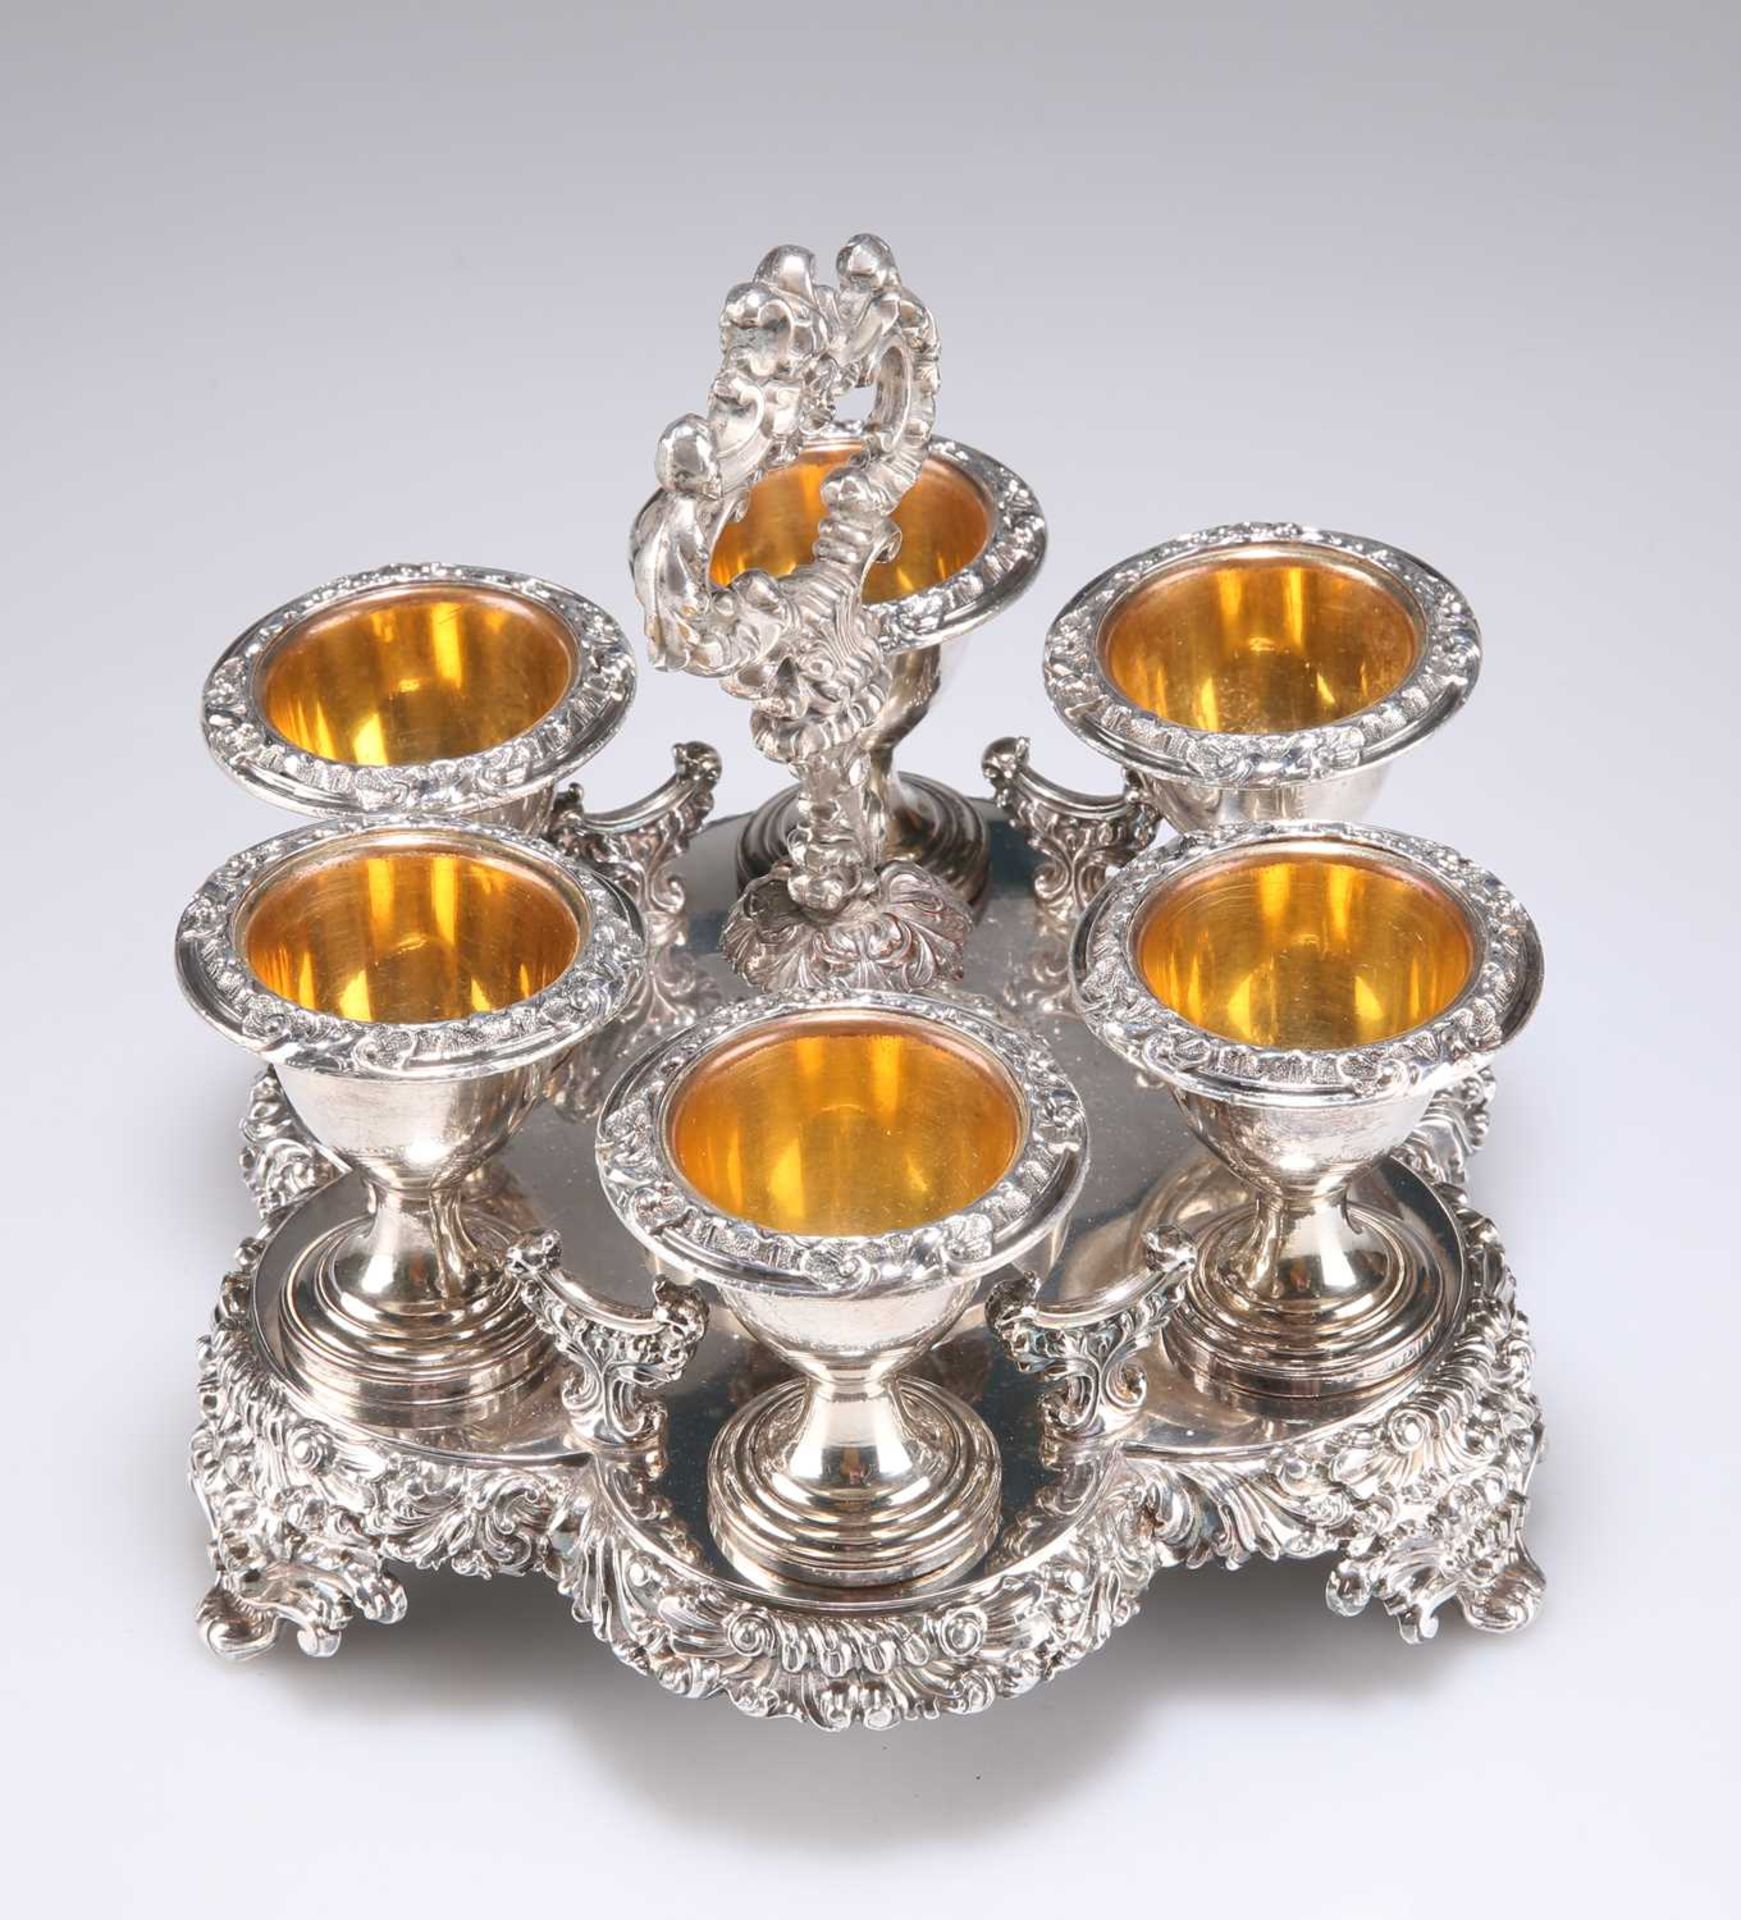 AN OLD SHEFFIELD PLATE EGG CRUET AND SIX CUPS, CIRCA 1835 - Image 2 of 7